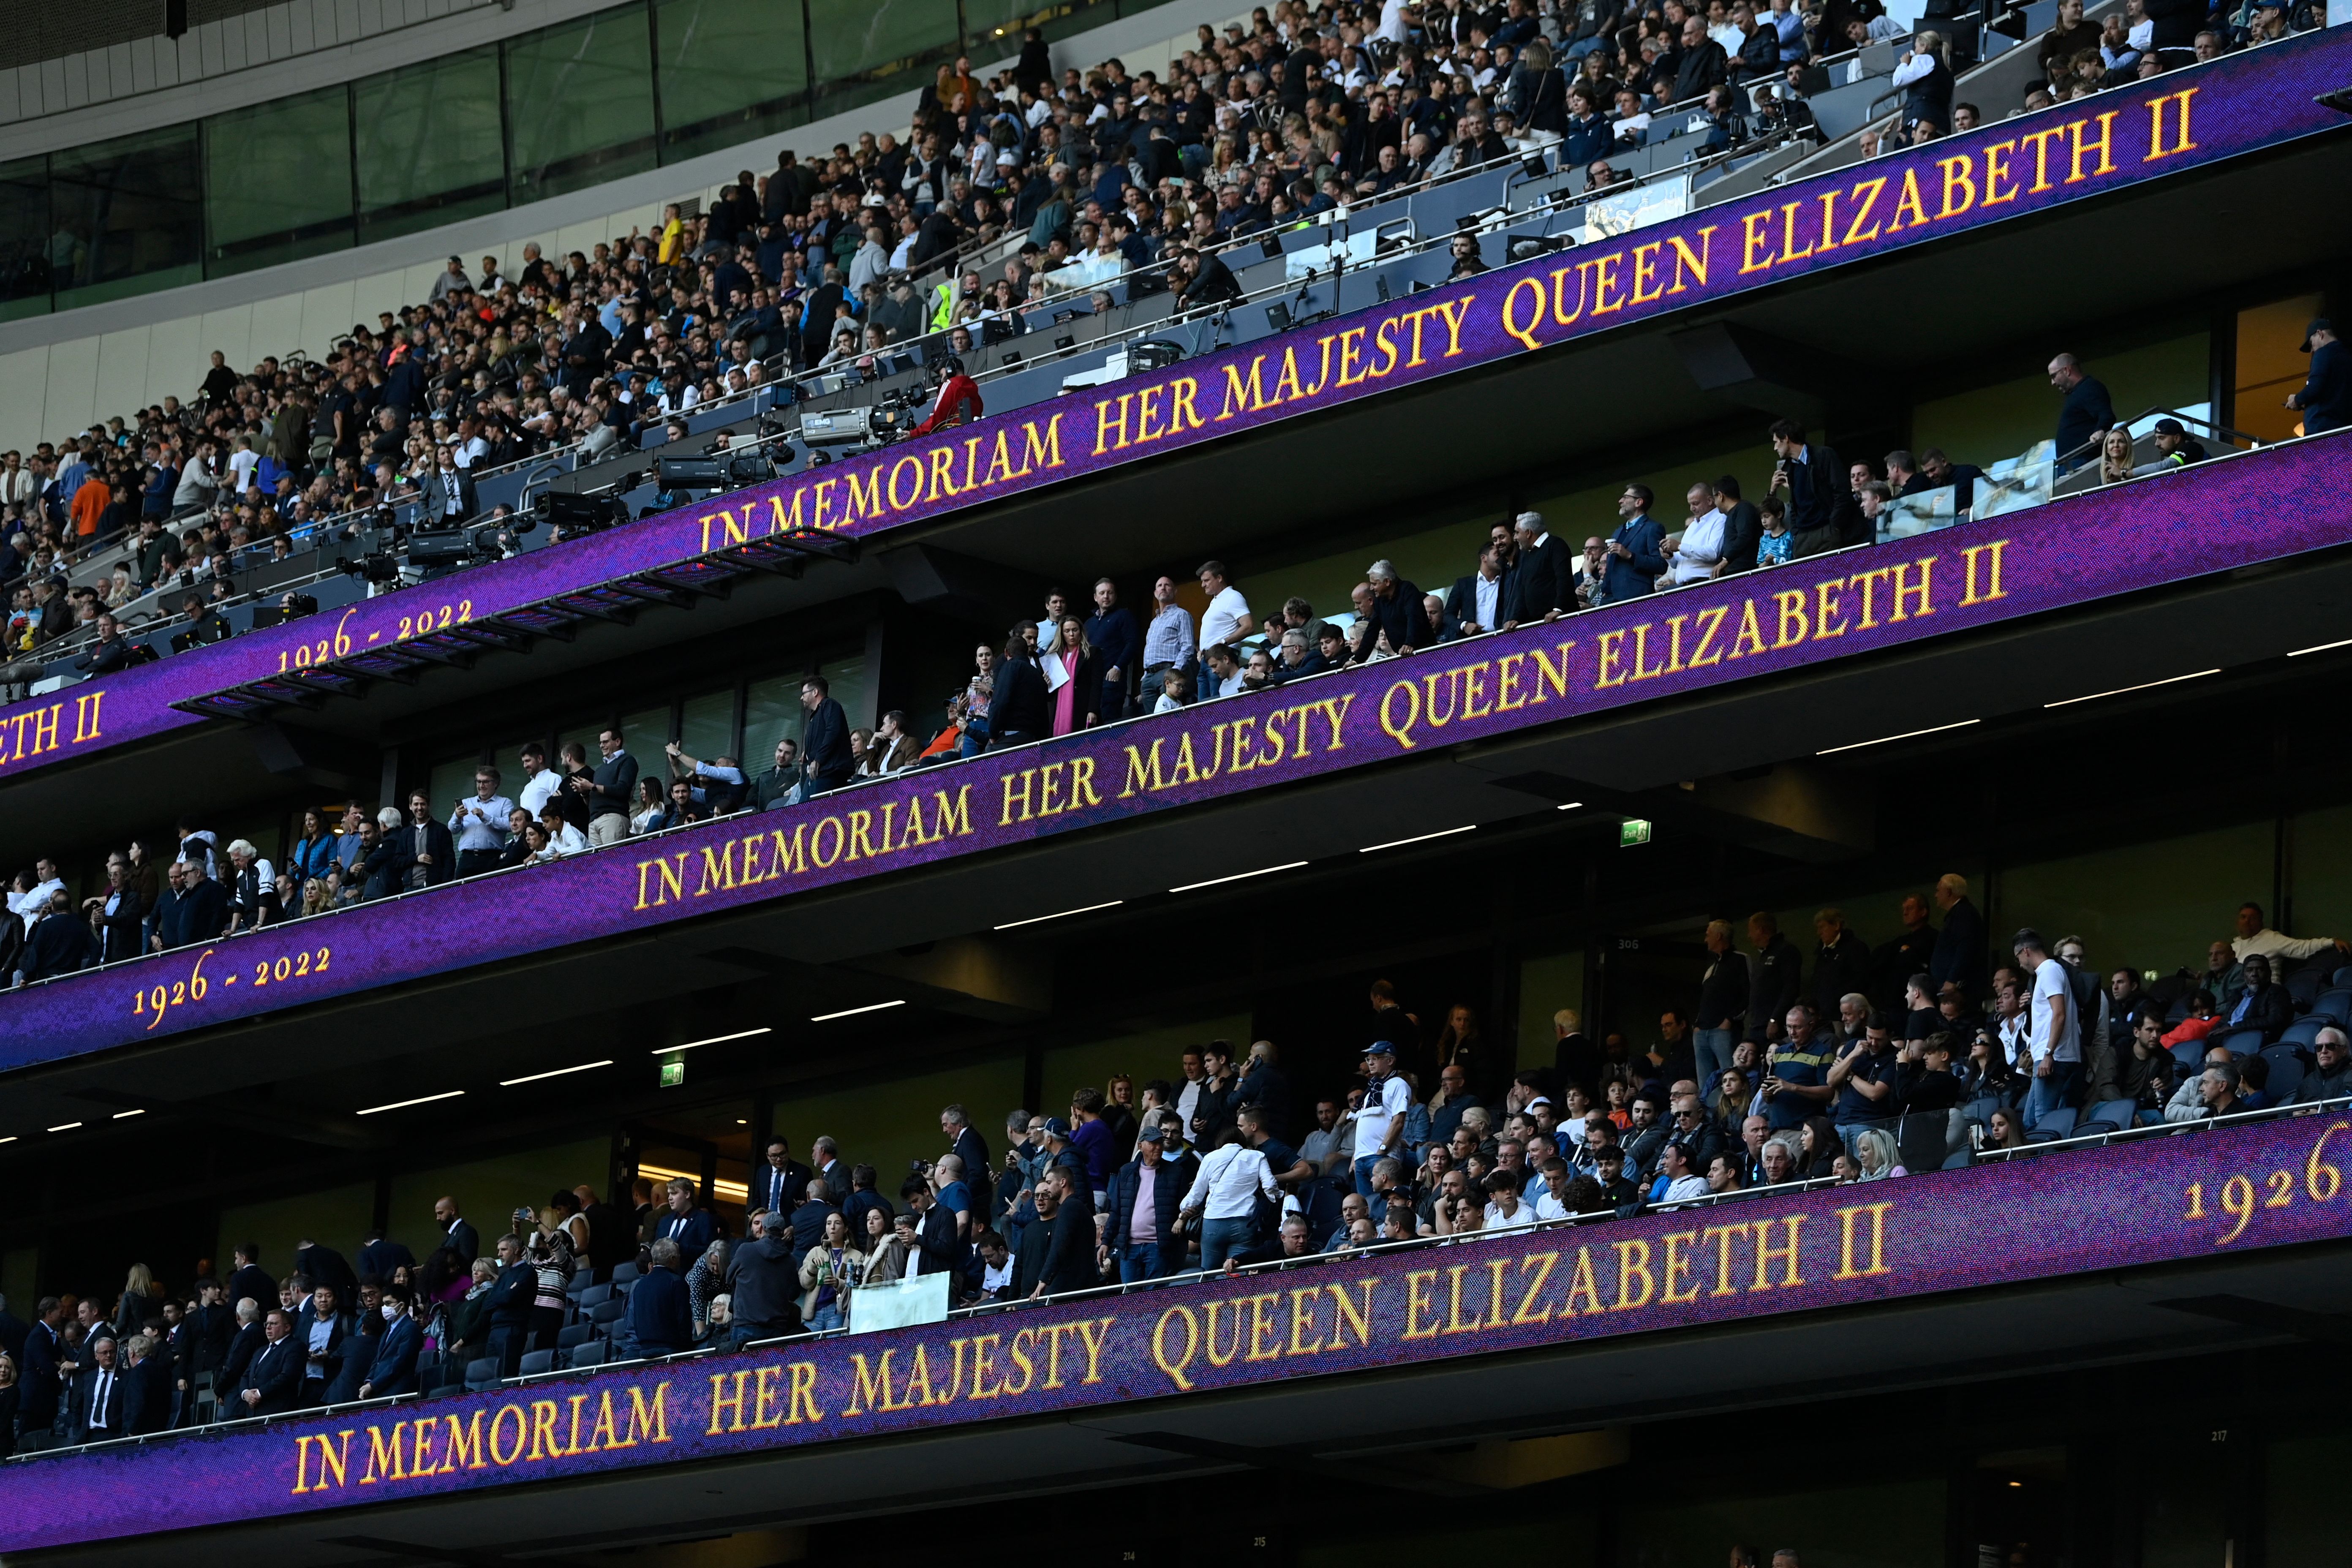 Soccer Football - Premier League - Tottenham Hotspur v Leicester City - Tottenham Hotspur Stadium, London, Britain - September 17, 2022 General view of the advertising boards before the match following the death of Britain's Queen Elizabeth REUTERS/Tony Obrien EDITORIAL USE ONLY. No use with unauthorized audio, video, data, fixture lists, club/league logos or 'live' services. Online in-match use limited to 75 images, no video emulation. No use in betting, games or single club /league/player publ